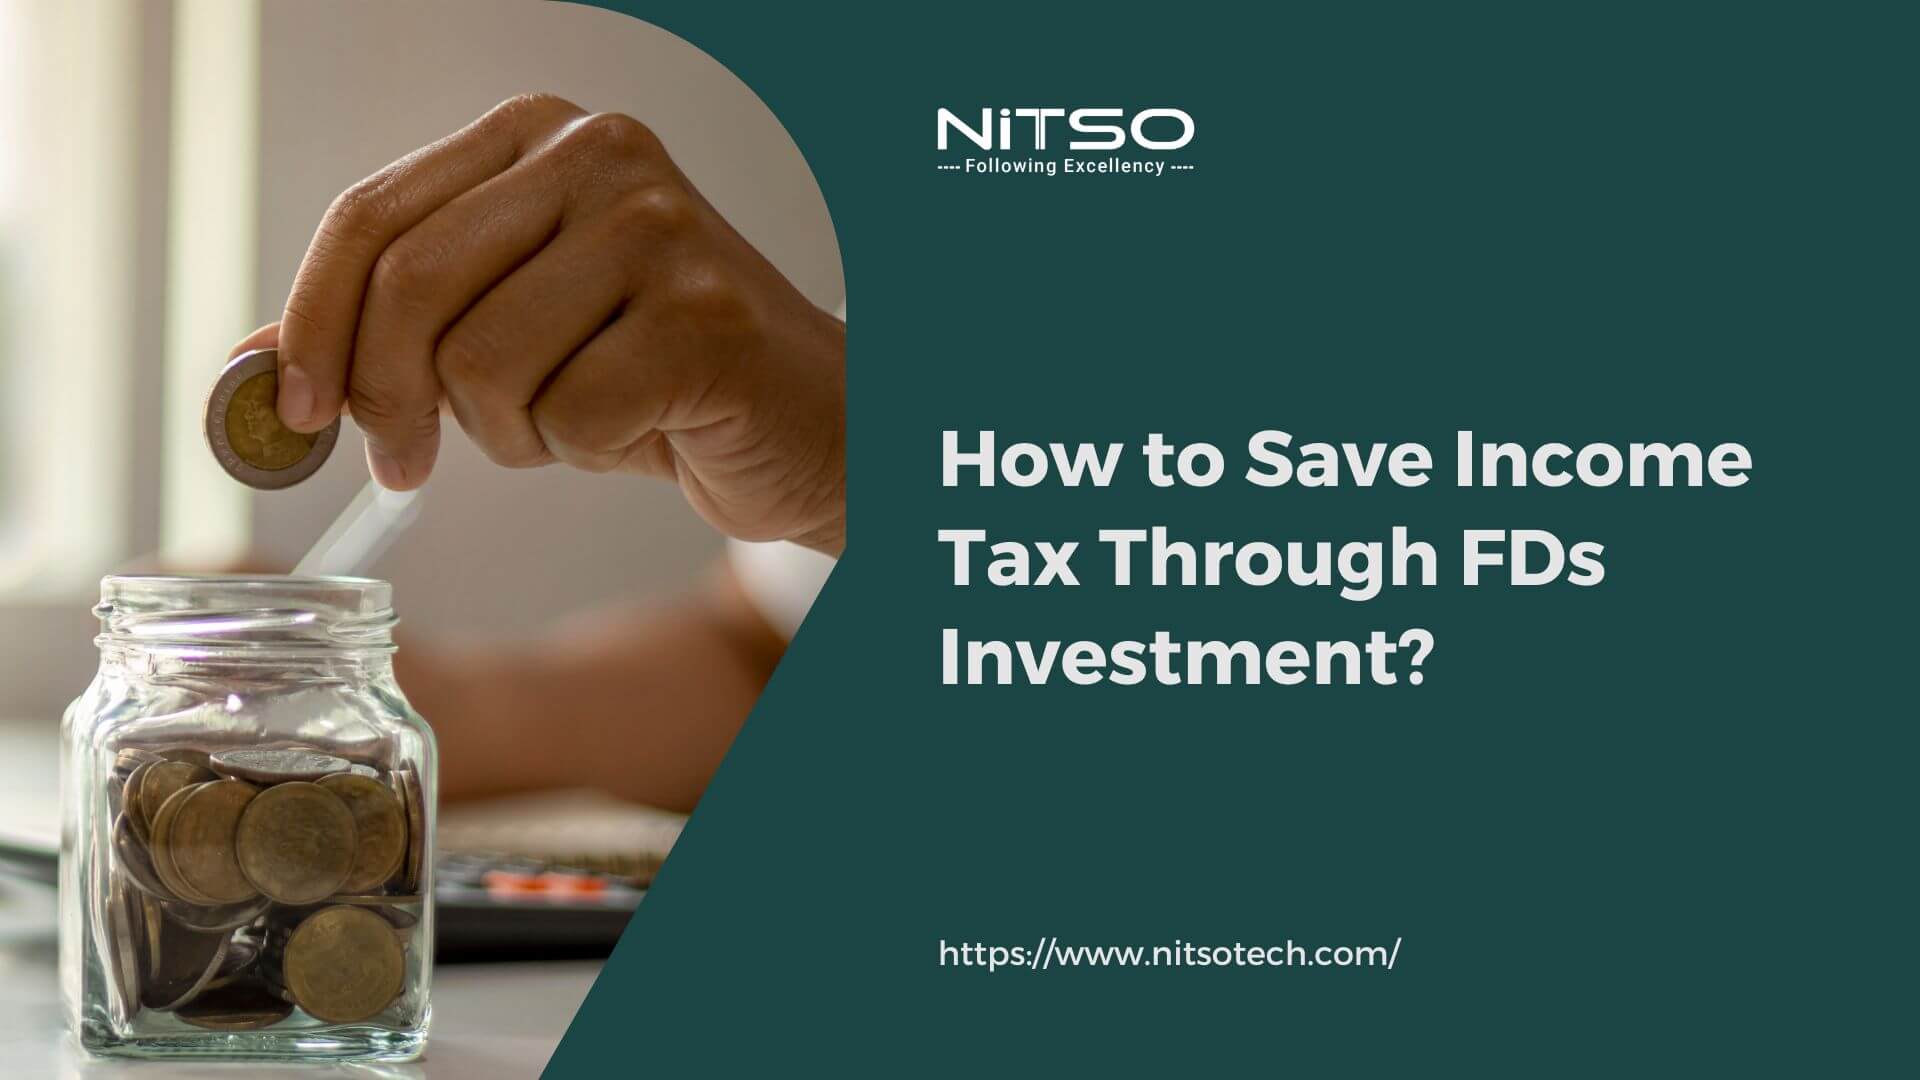 How to Reduce Tax Legally with Smart FD Investing?